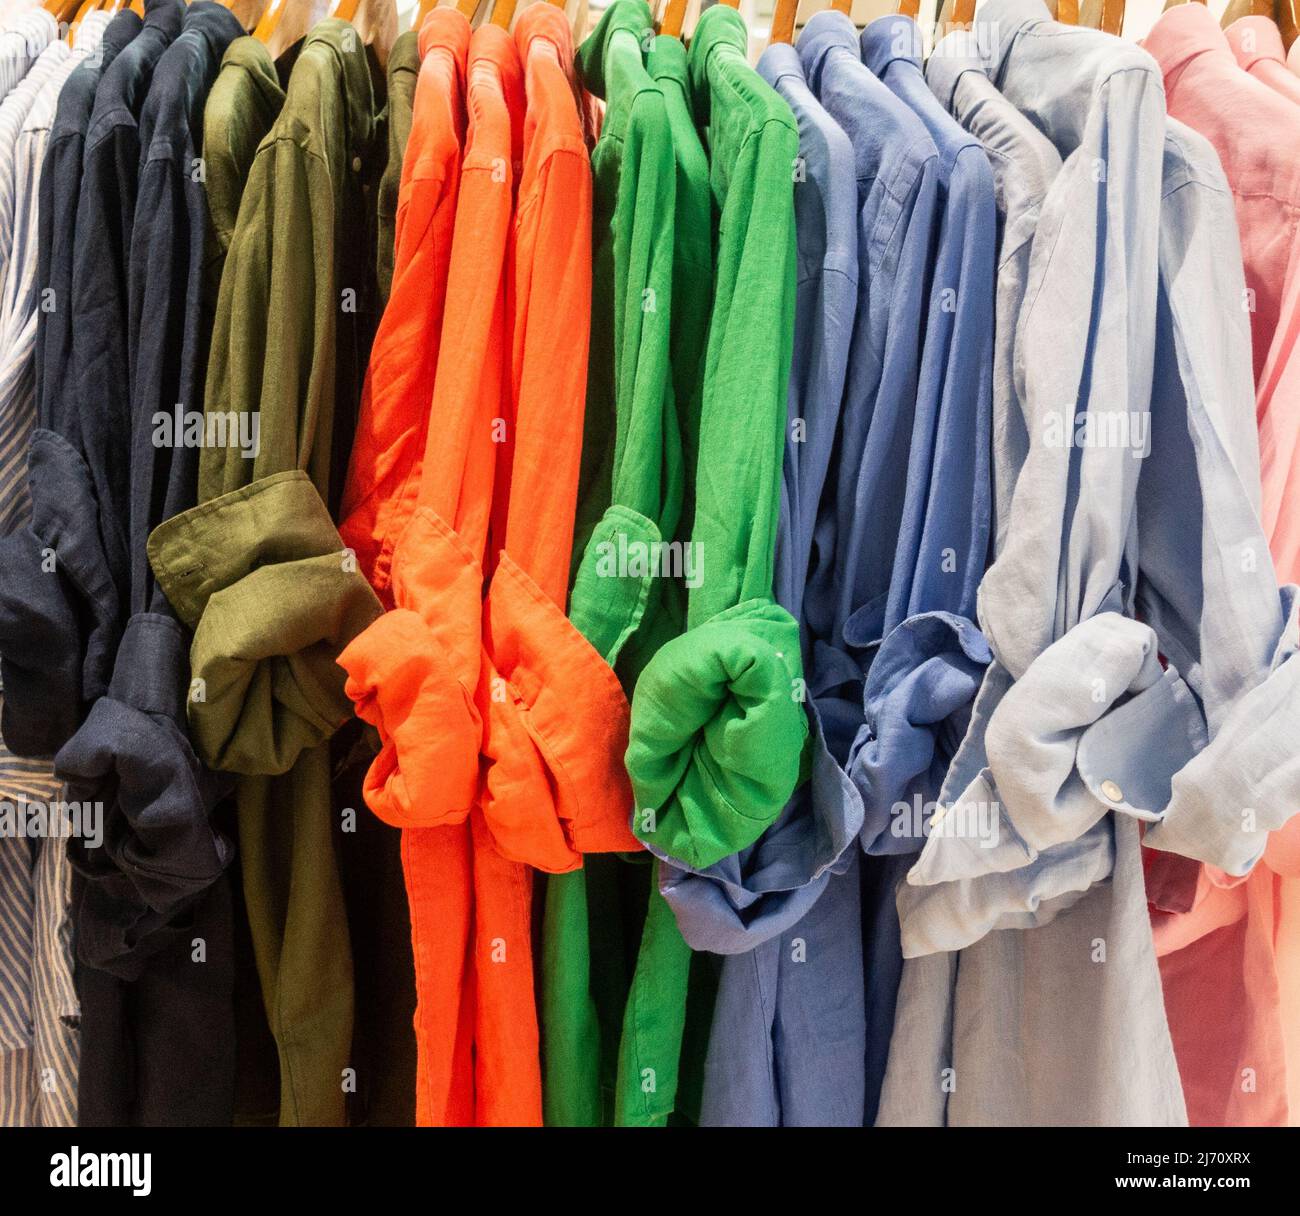 Colourful shirts on display in department store. Stock Photo